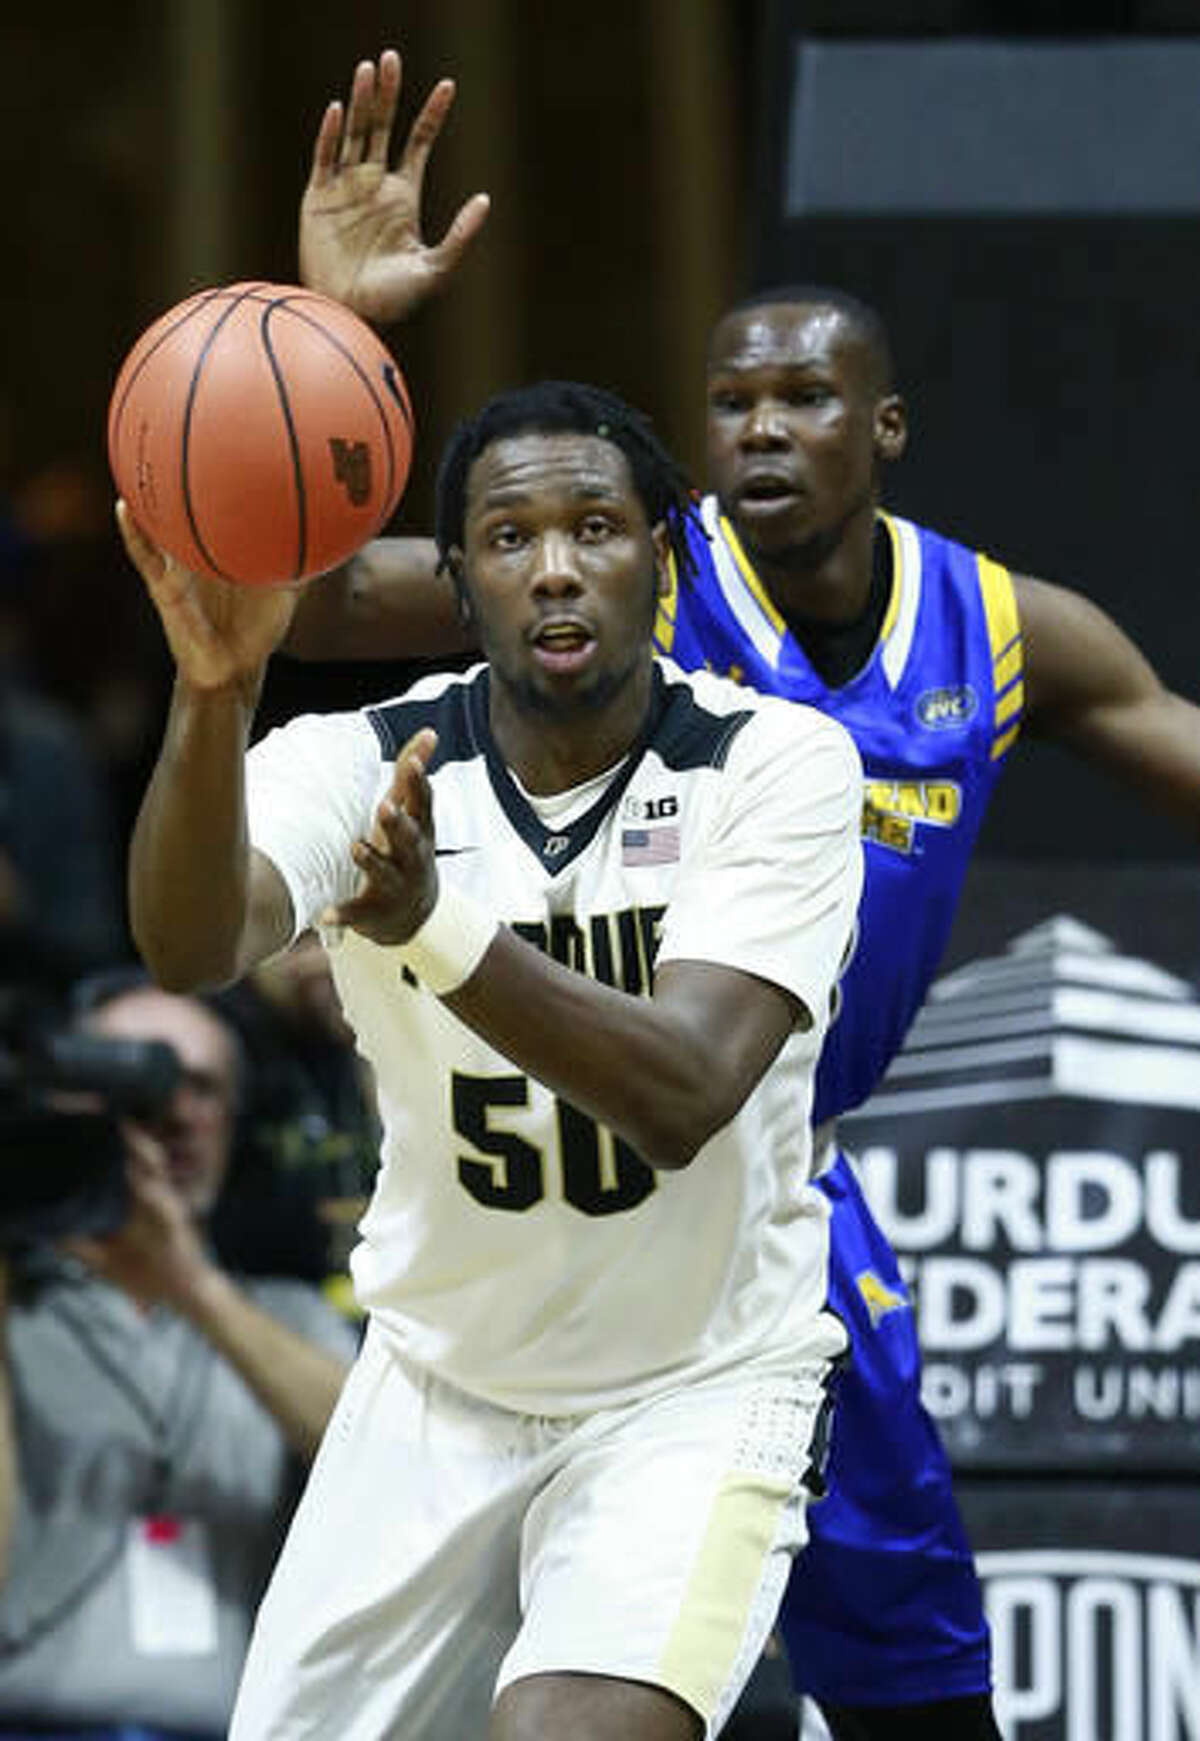 Purdue forward Caleb Swanigan (50) passes the basketball defended by Morehead State forward Keion Alexander in the first half of an NCAA college basketball game, Saturday, Dec. 3, 2016, in West Lafayette, Ind. Purdue won 90-56. (AP Photo/R Brent Smith)